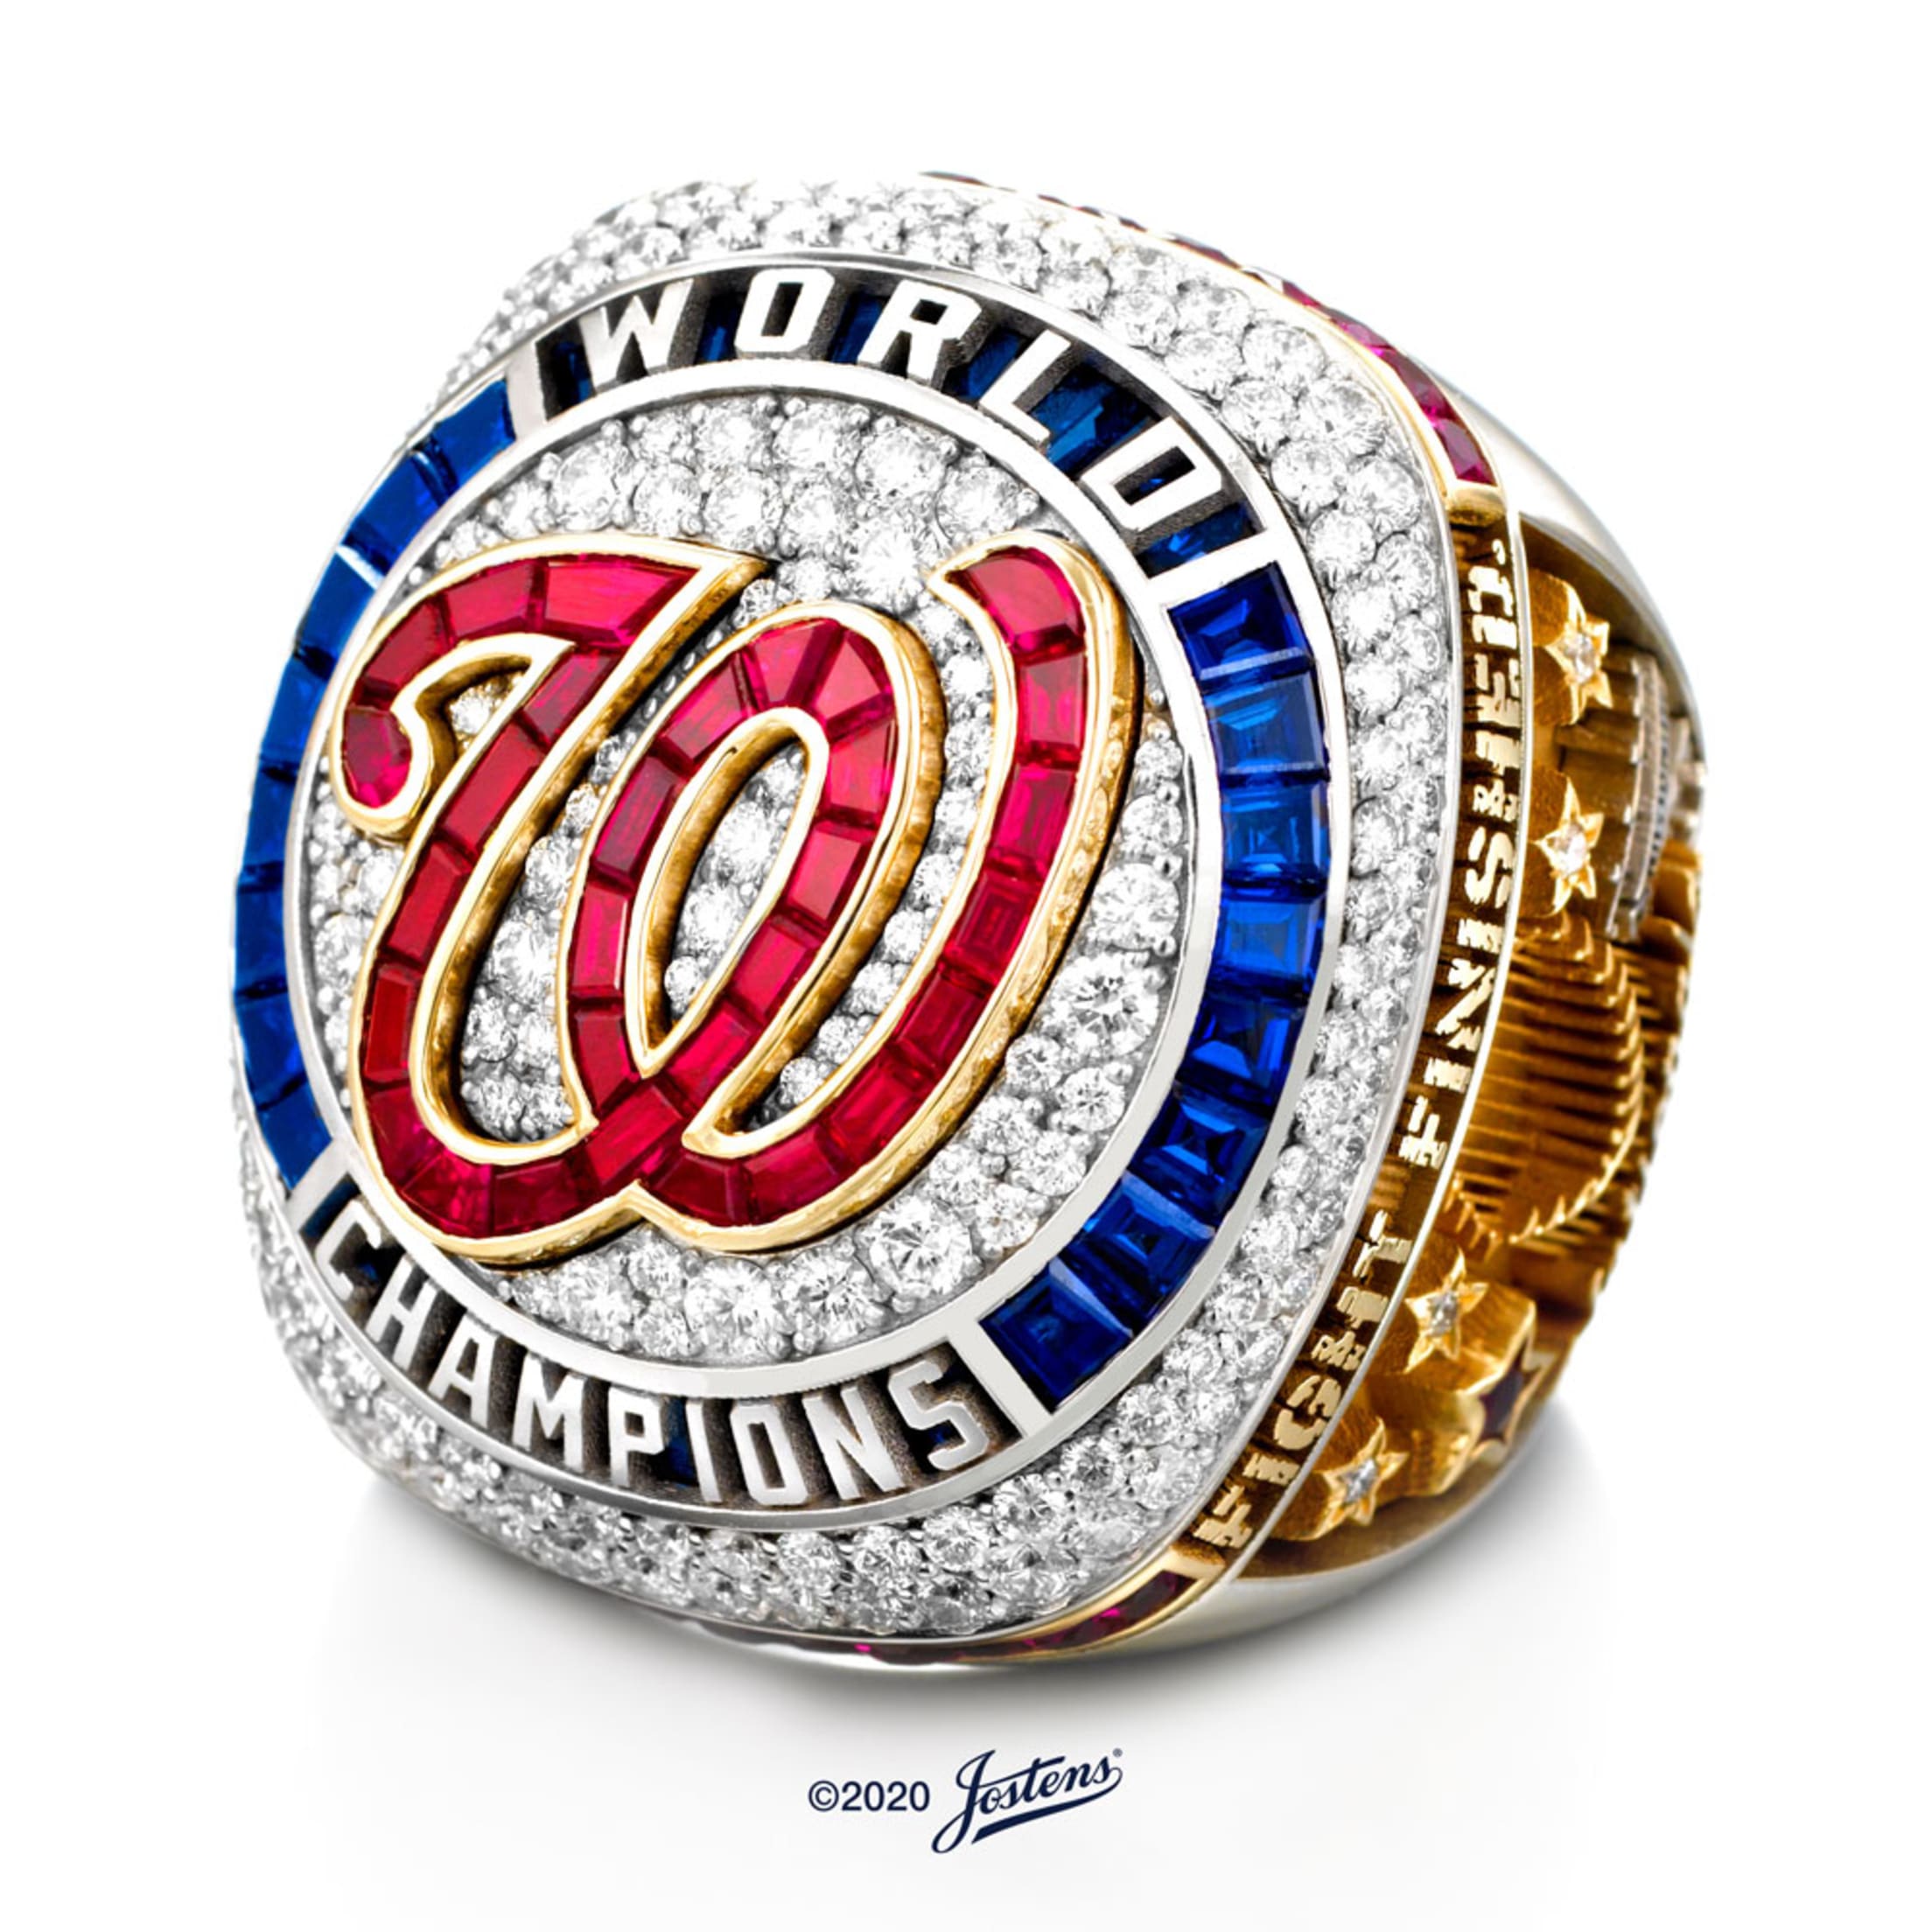 2019 New Boston Red Sox Rings 